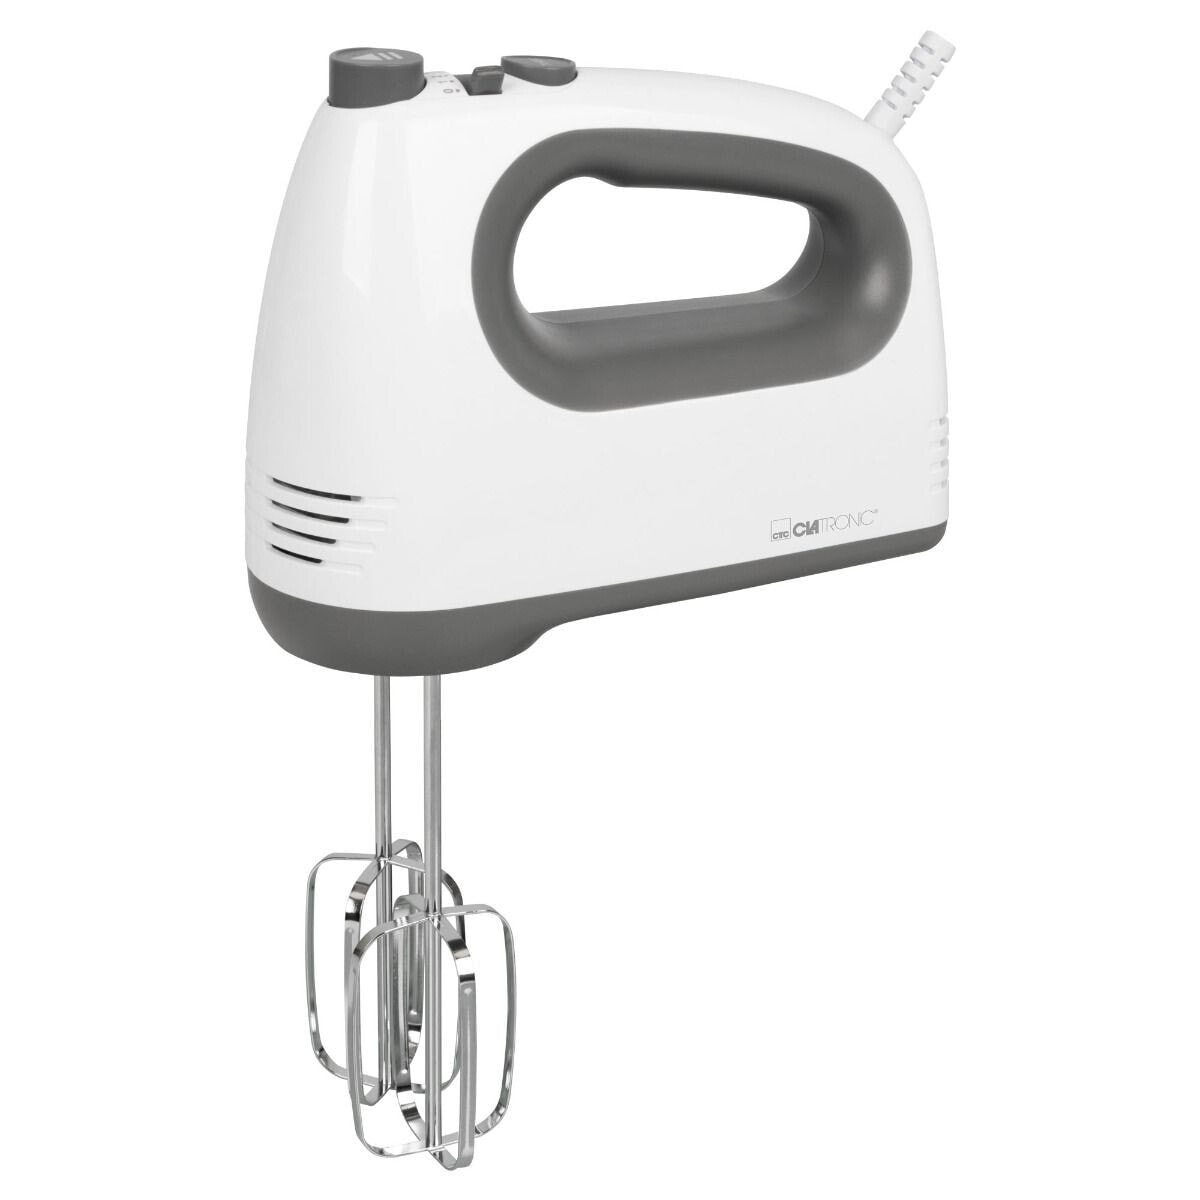 Handmixer HM3775 400W wh/gy| 263 970